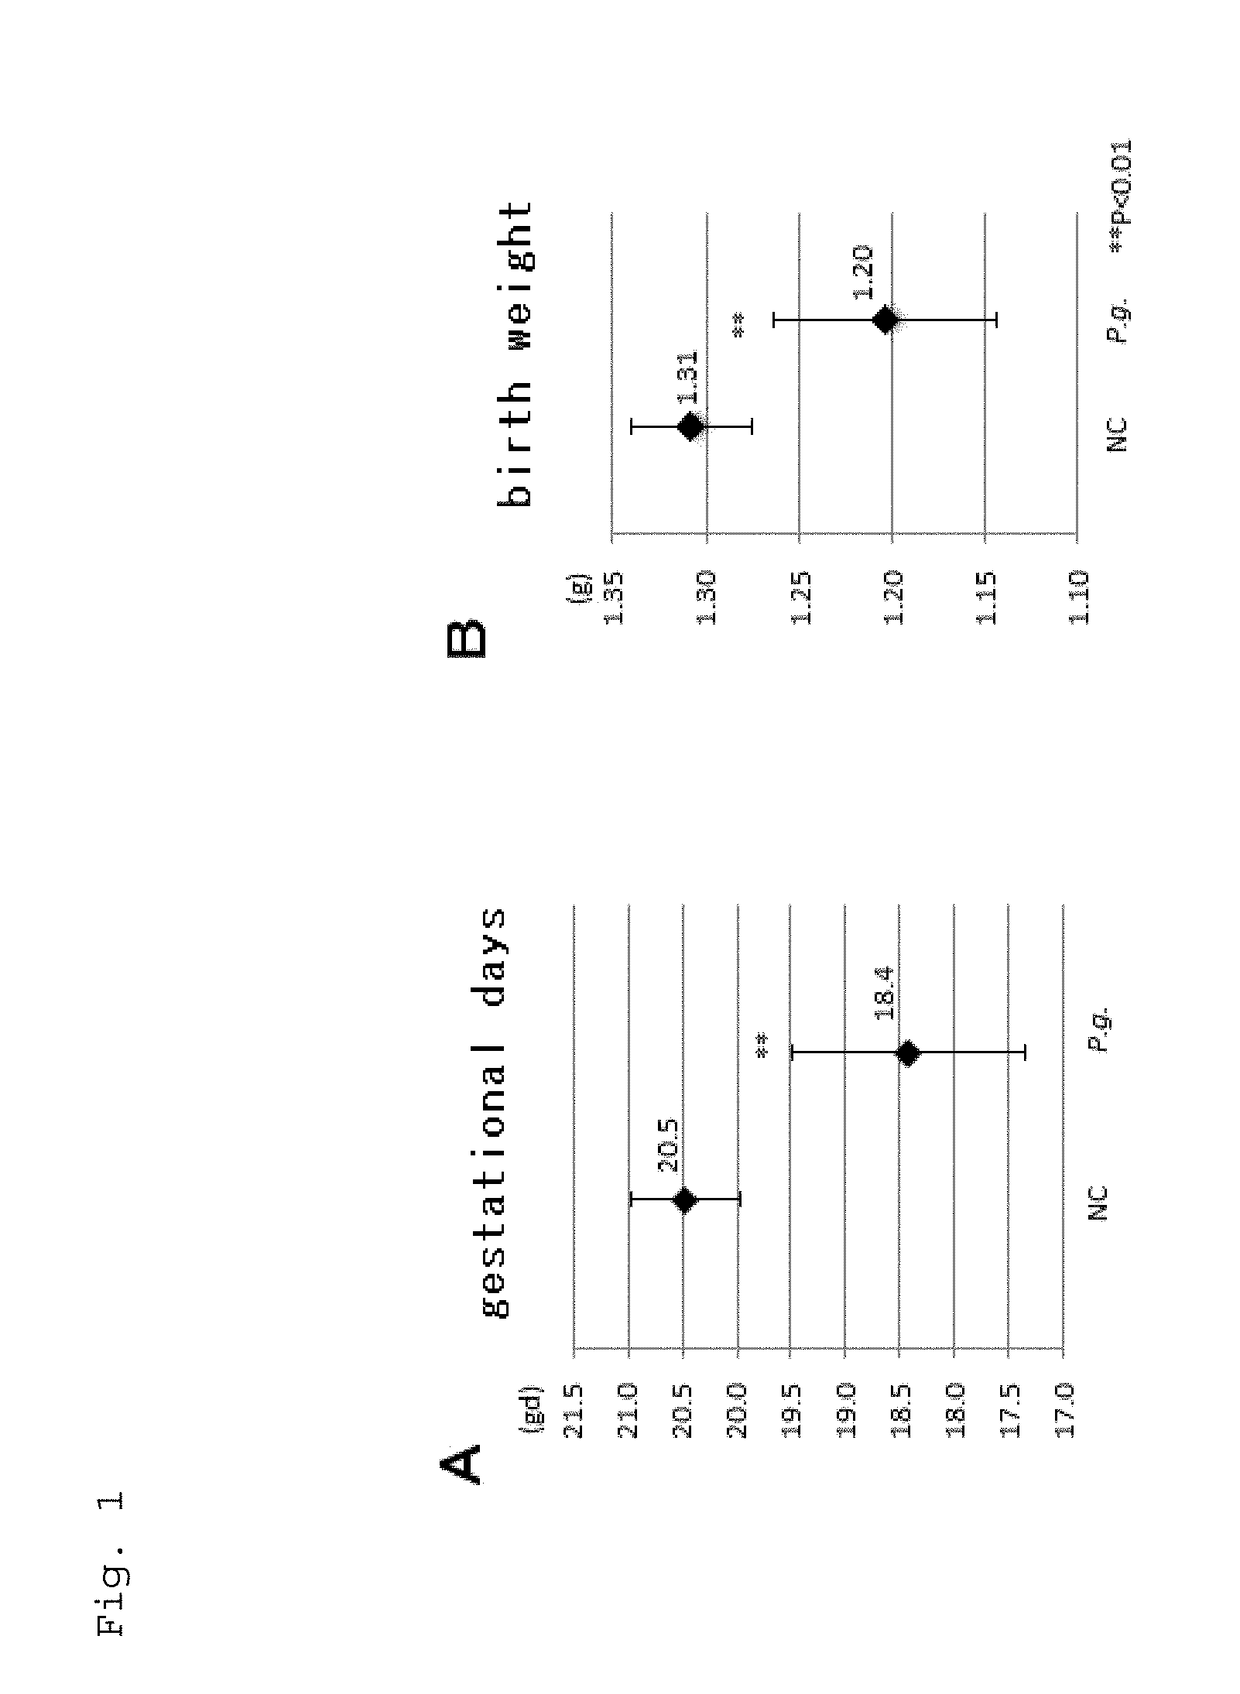 Method and Kit for Determining Risk of Preterm Birth and/or Birth of Low-Birth-Weight Baby